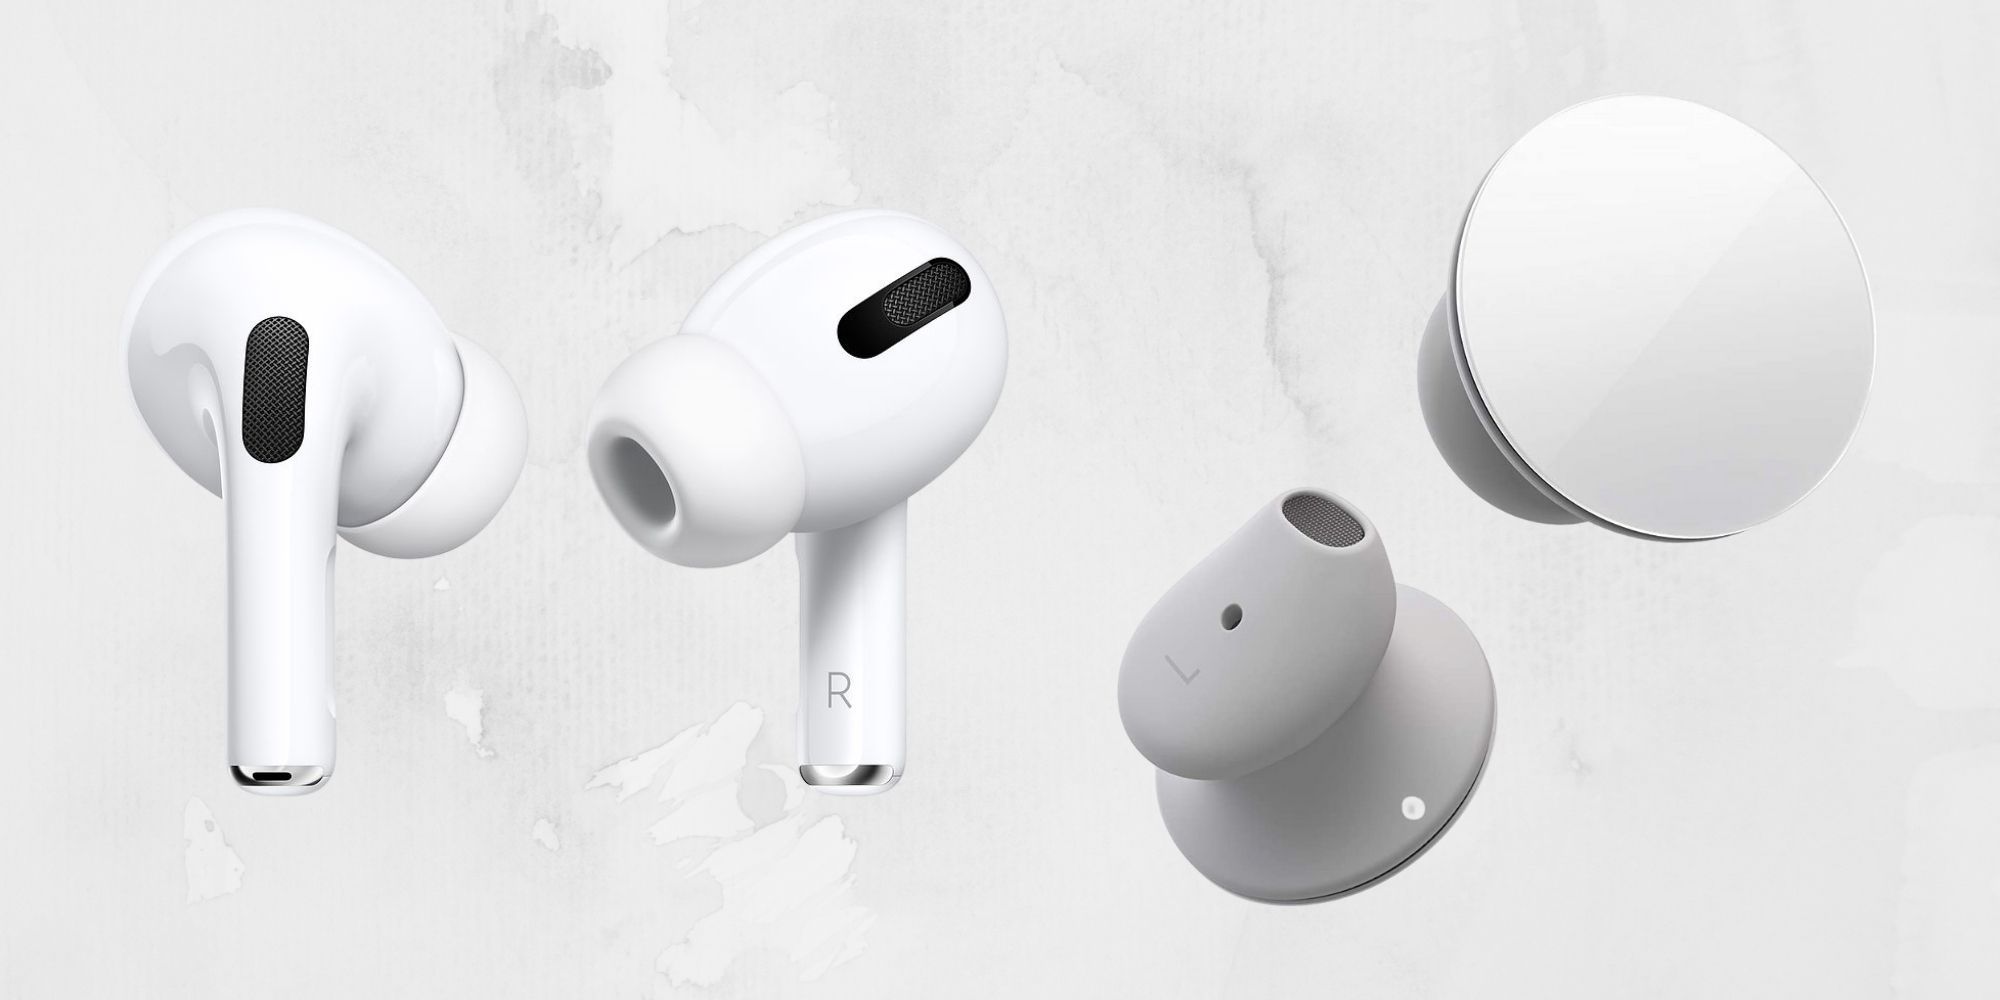 Apple AirPods Pro and Microsoft Surface Earbuds